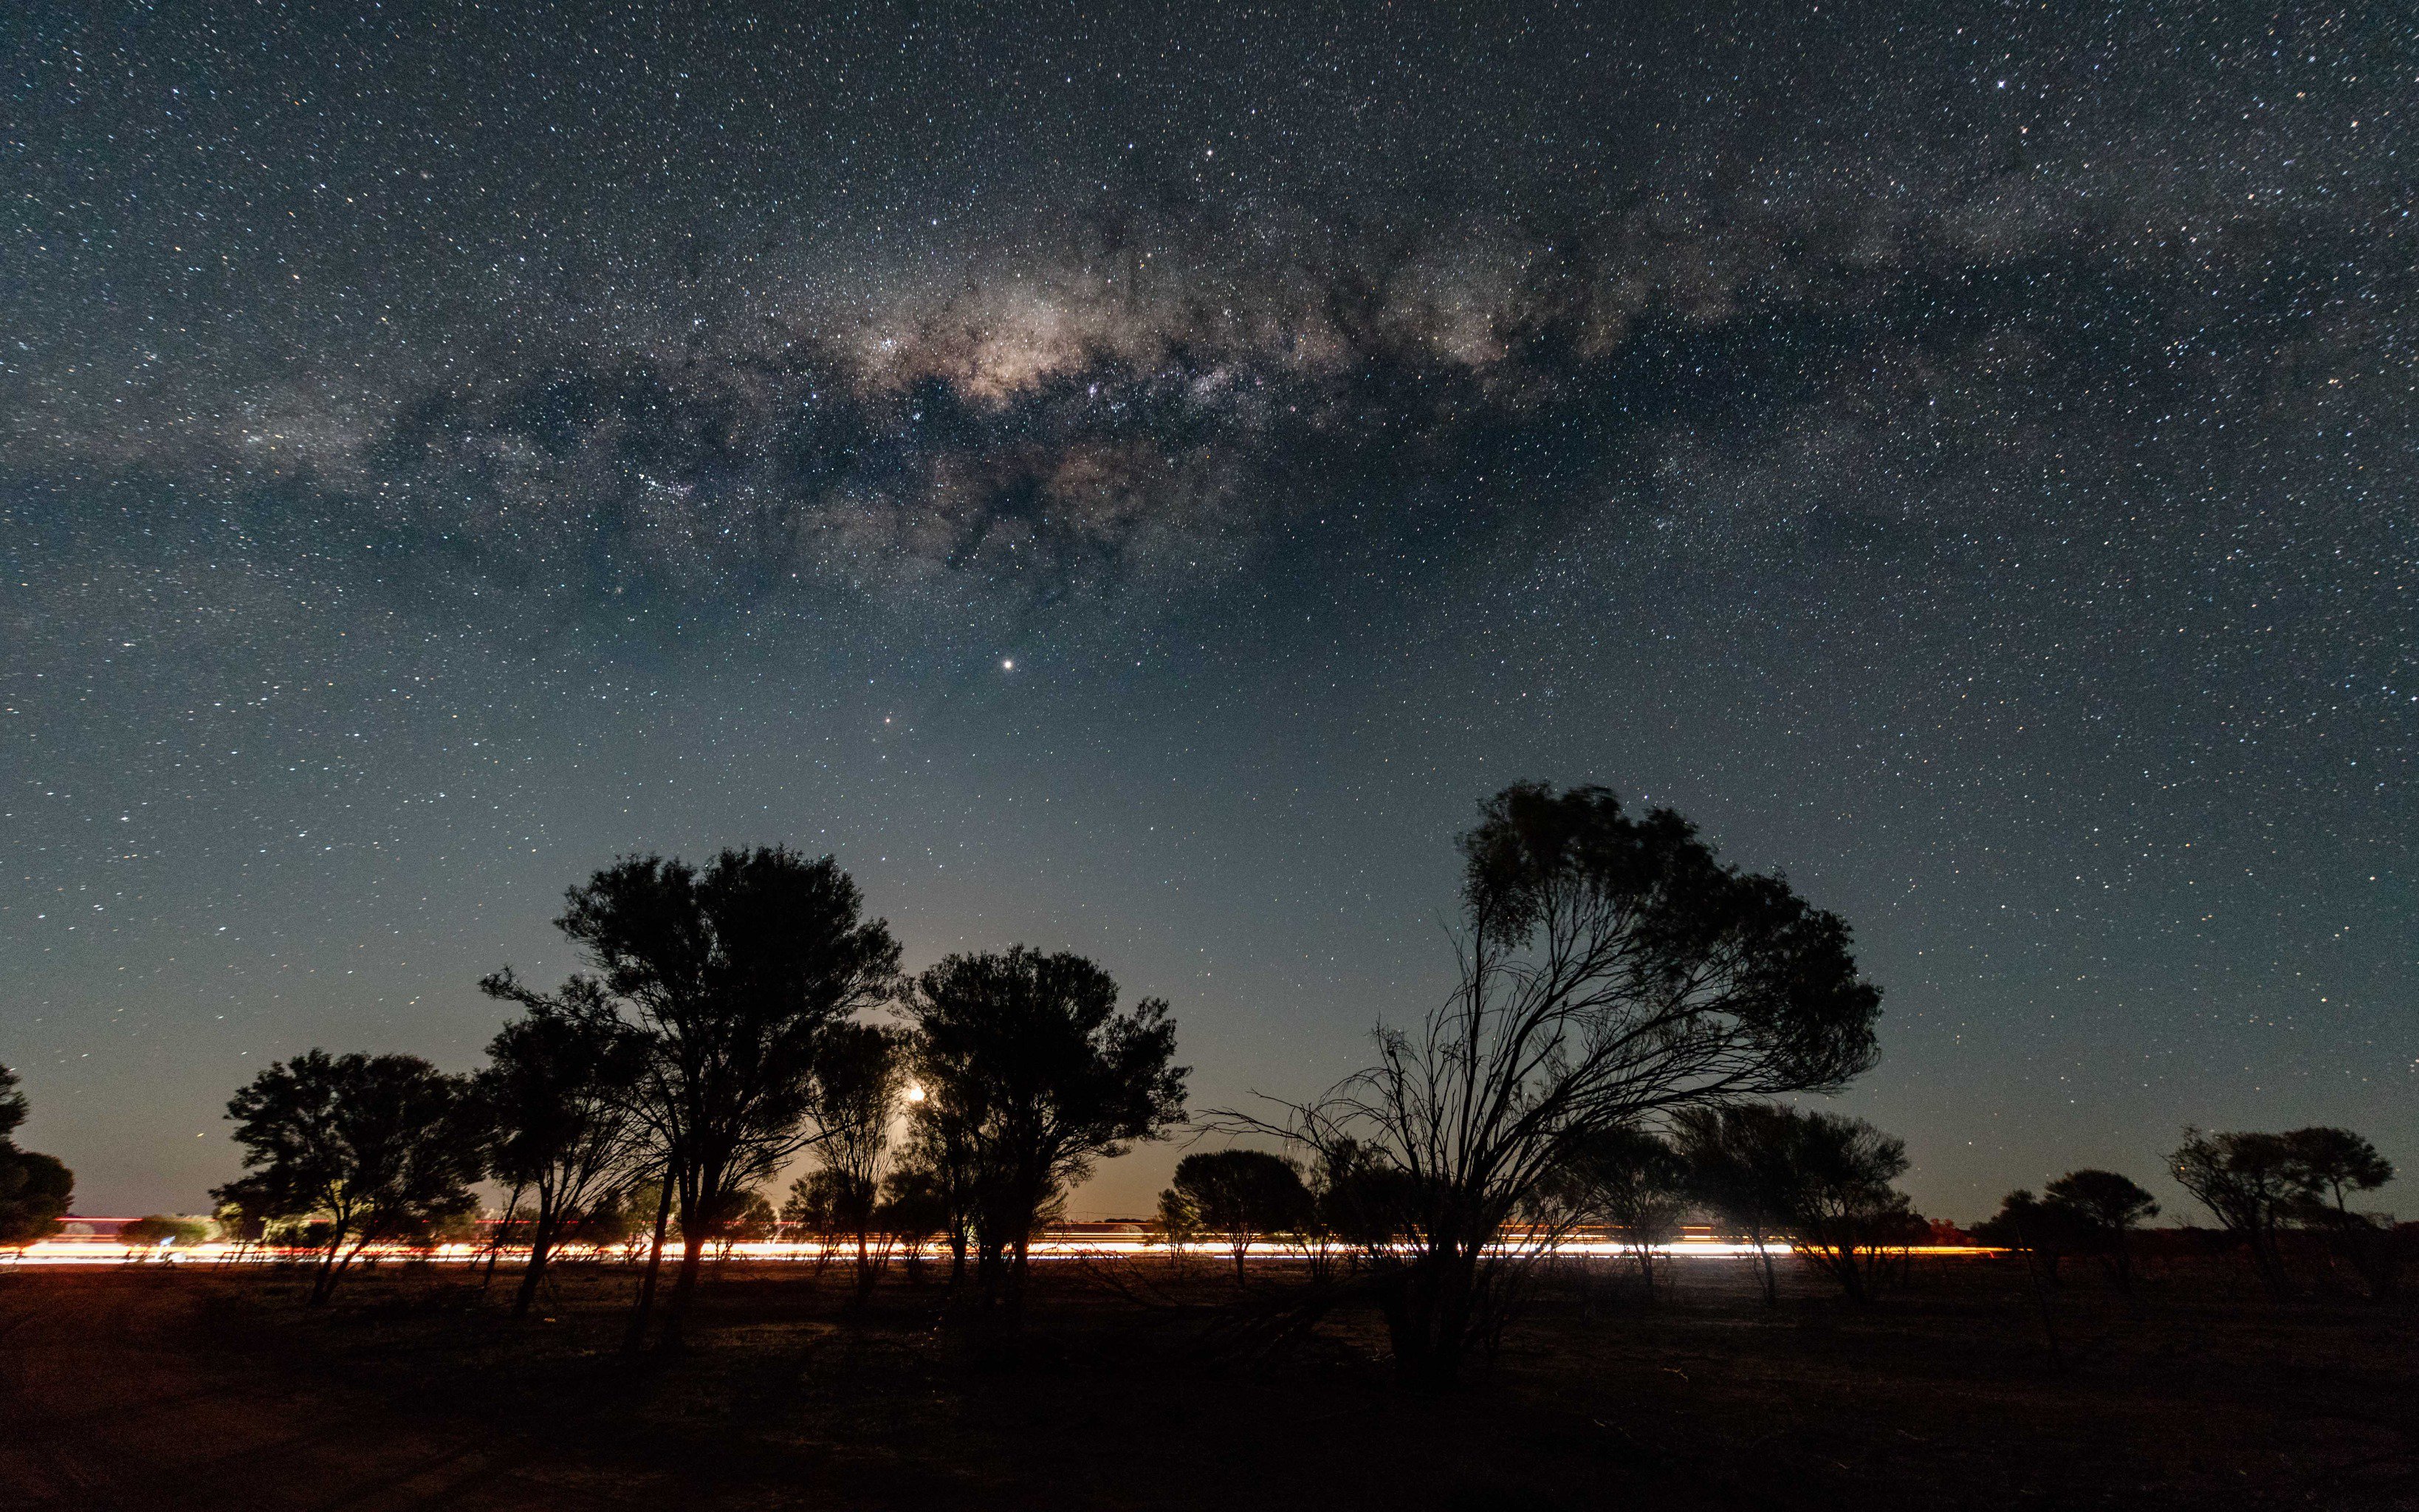 3rd Place Outback Western Australia as the Milky Way displays above a full, setting moon by Judy Leitch @leitchbird